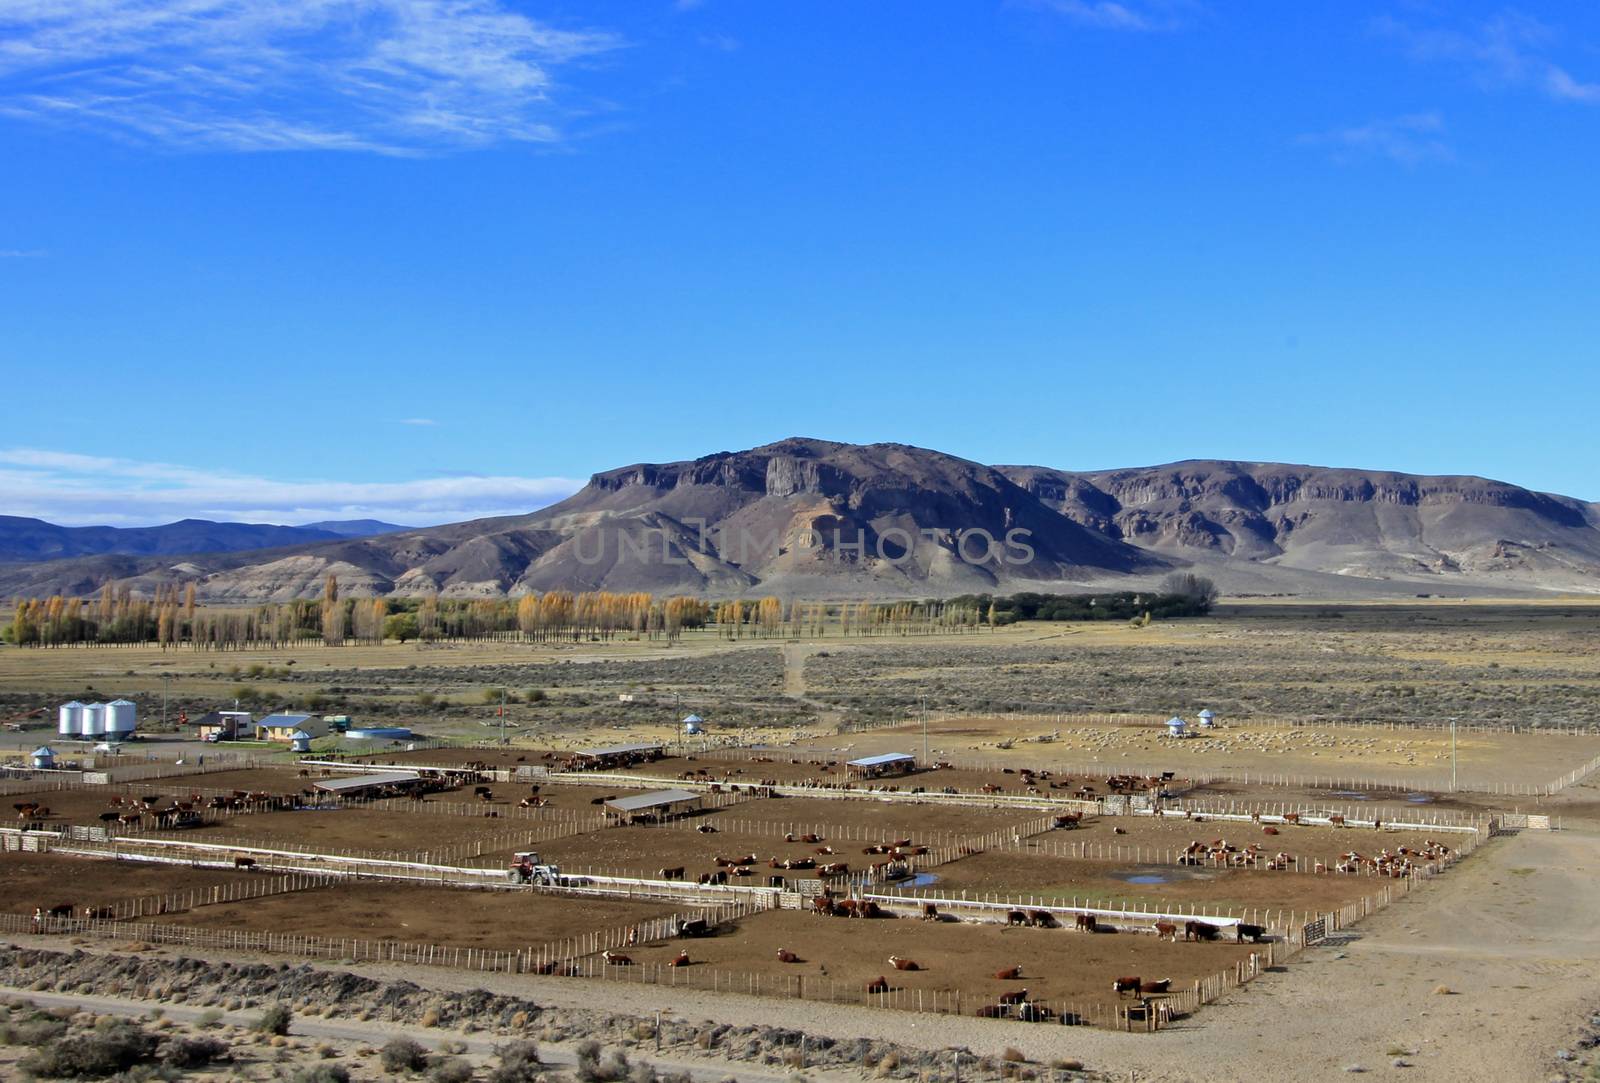 Huge cow farm, Patagonia, Argentina by cicloco